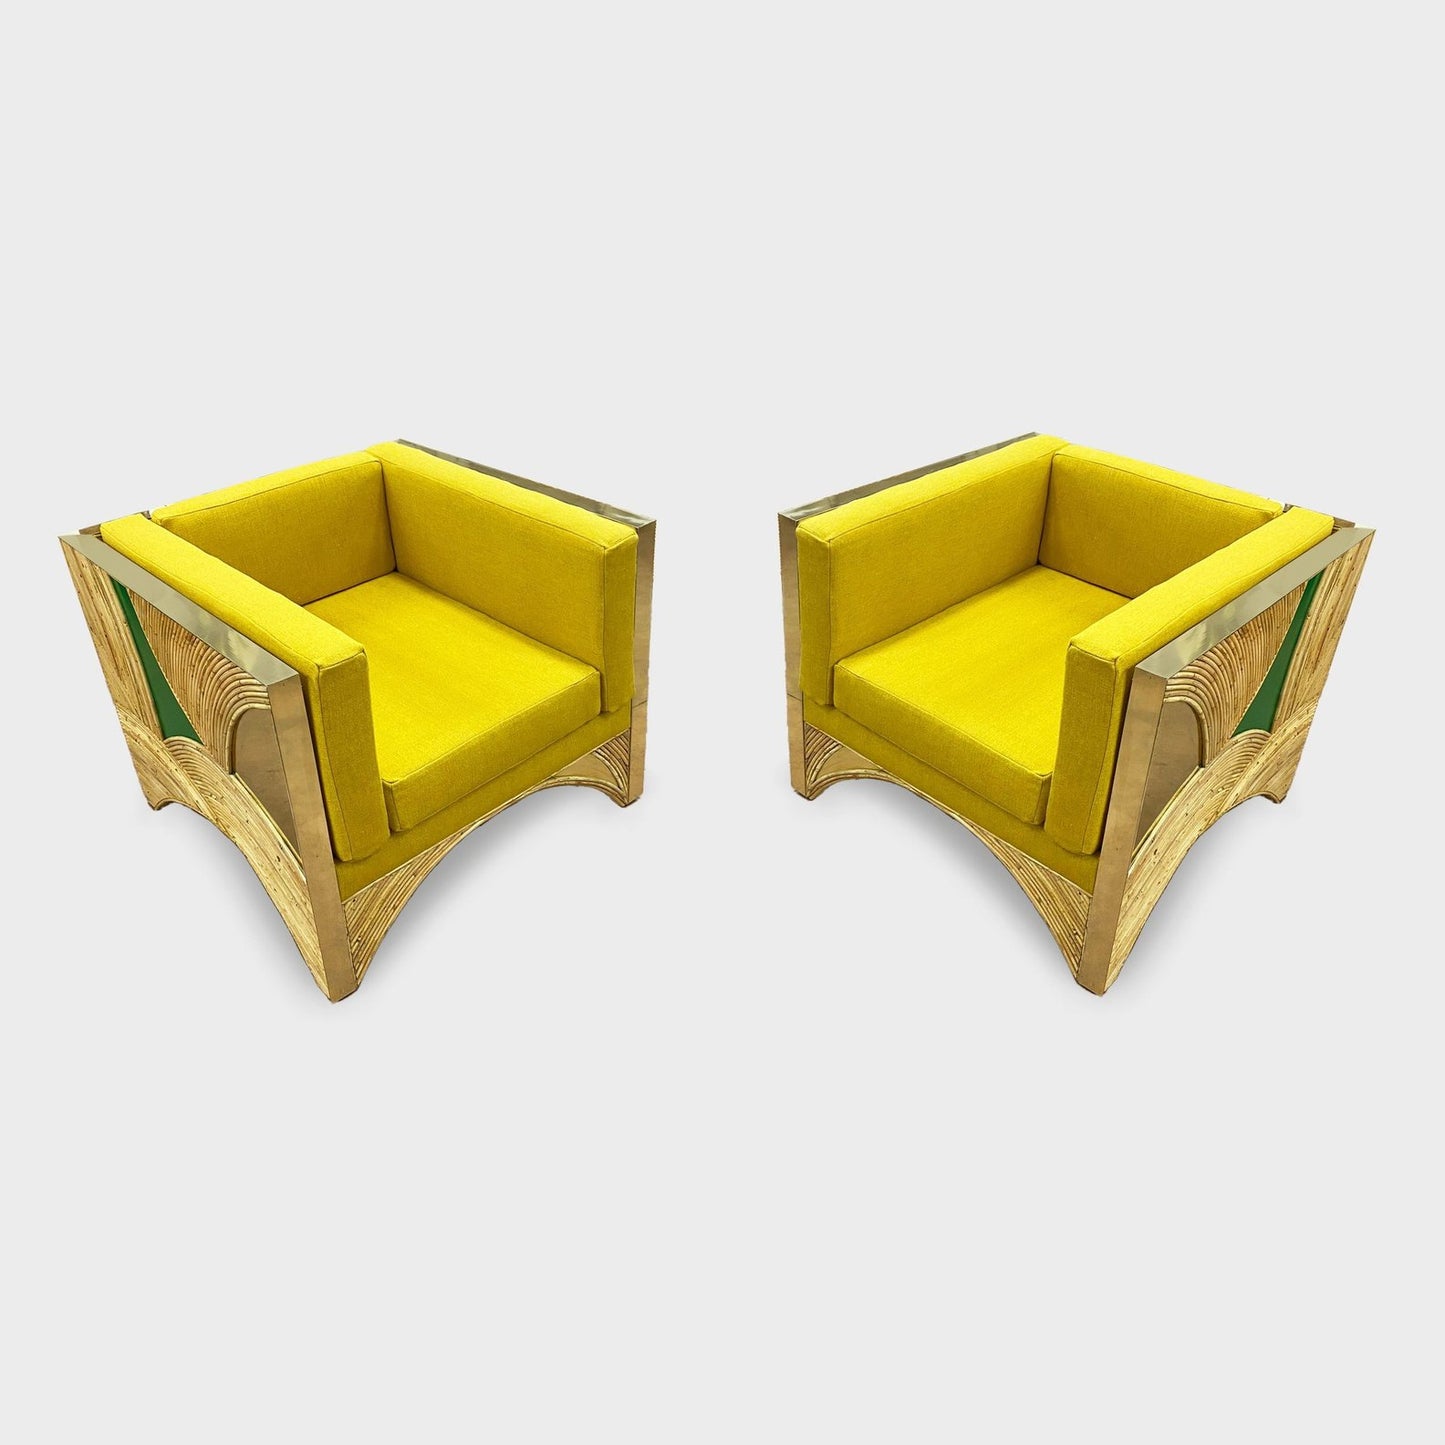 Contemporary Italian Rattan Armchair with Green Brass Details & Yellow Fabric